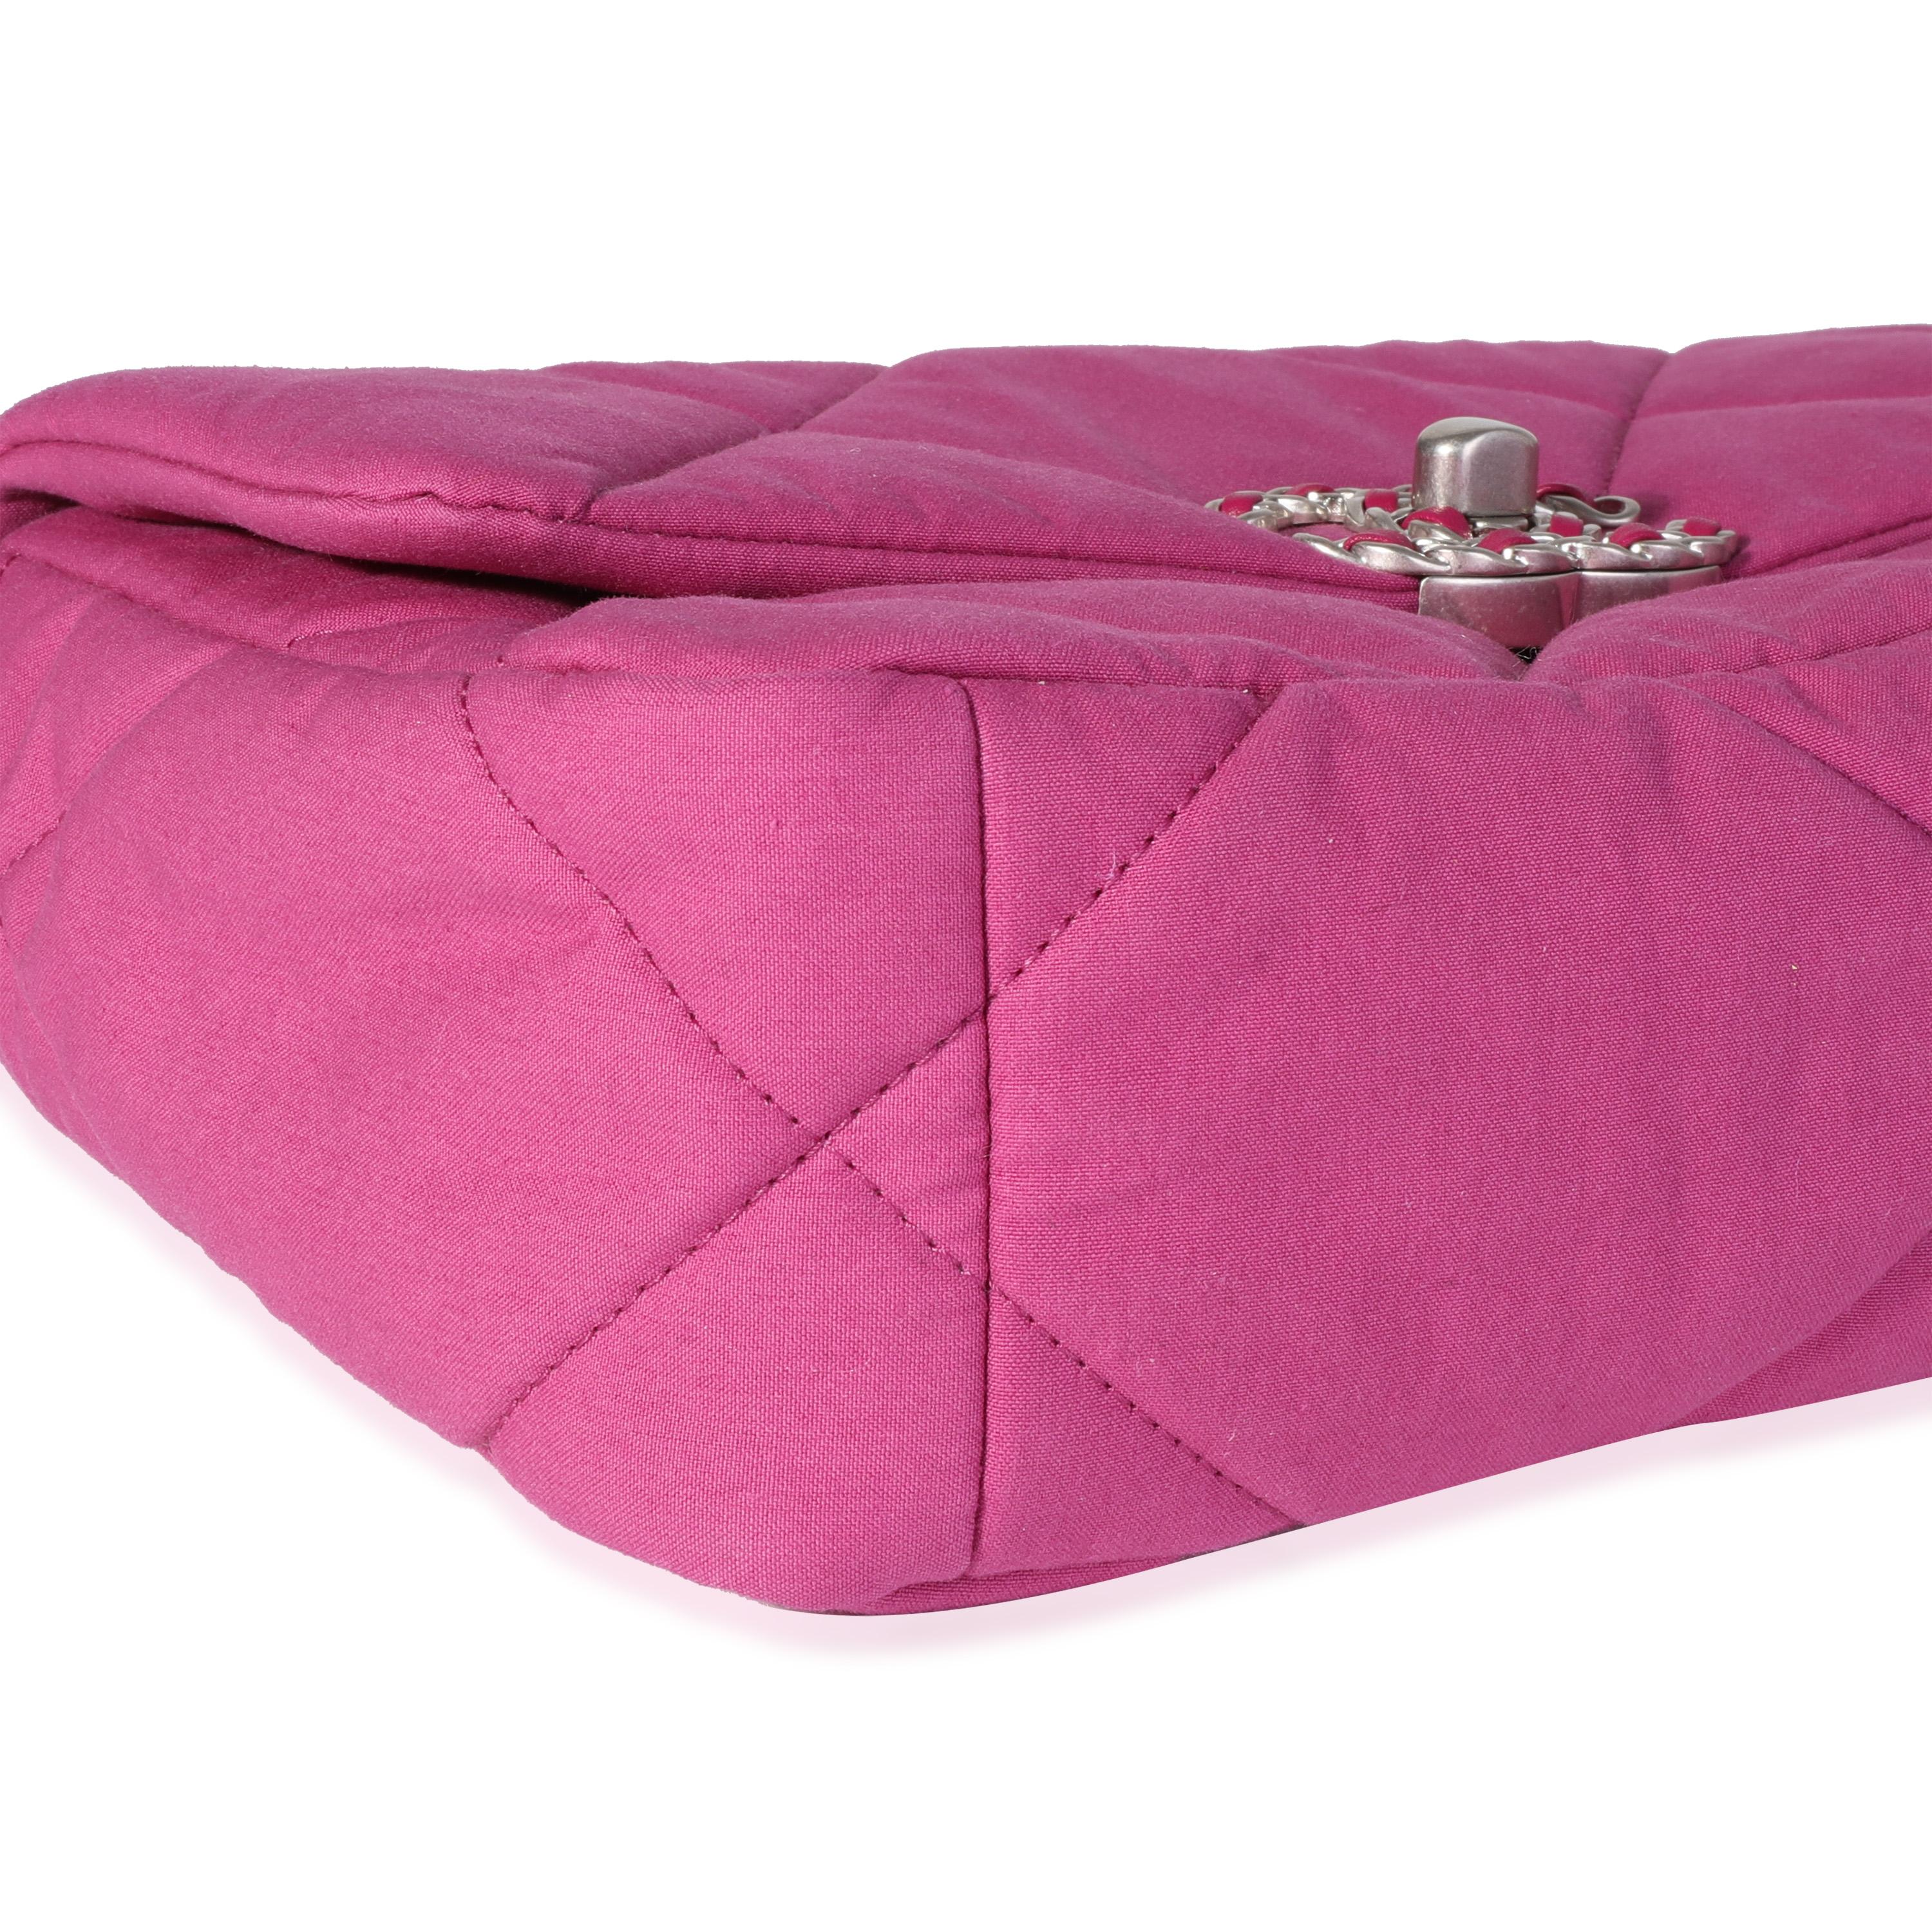 Listing Title: Chanel Fuchsia Quilted Cotton Medium Chanel 19 Flap Bag
SKU: 116642
Condition: Pre-owned (3000)
Handbag Condition: Mint
Condition Comments: Mint Condition. Plastic on hardware. No visible signs of wear. Final sale.
Brand: